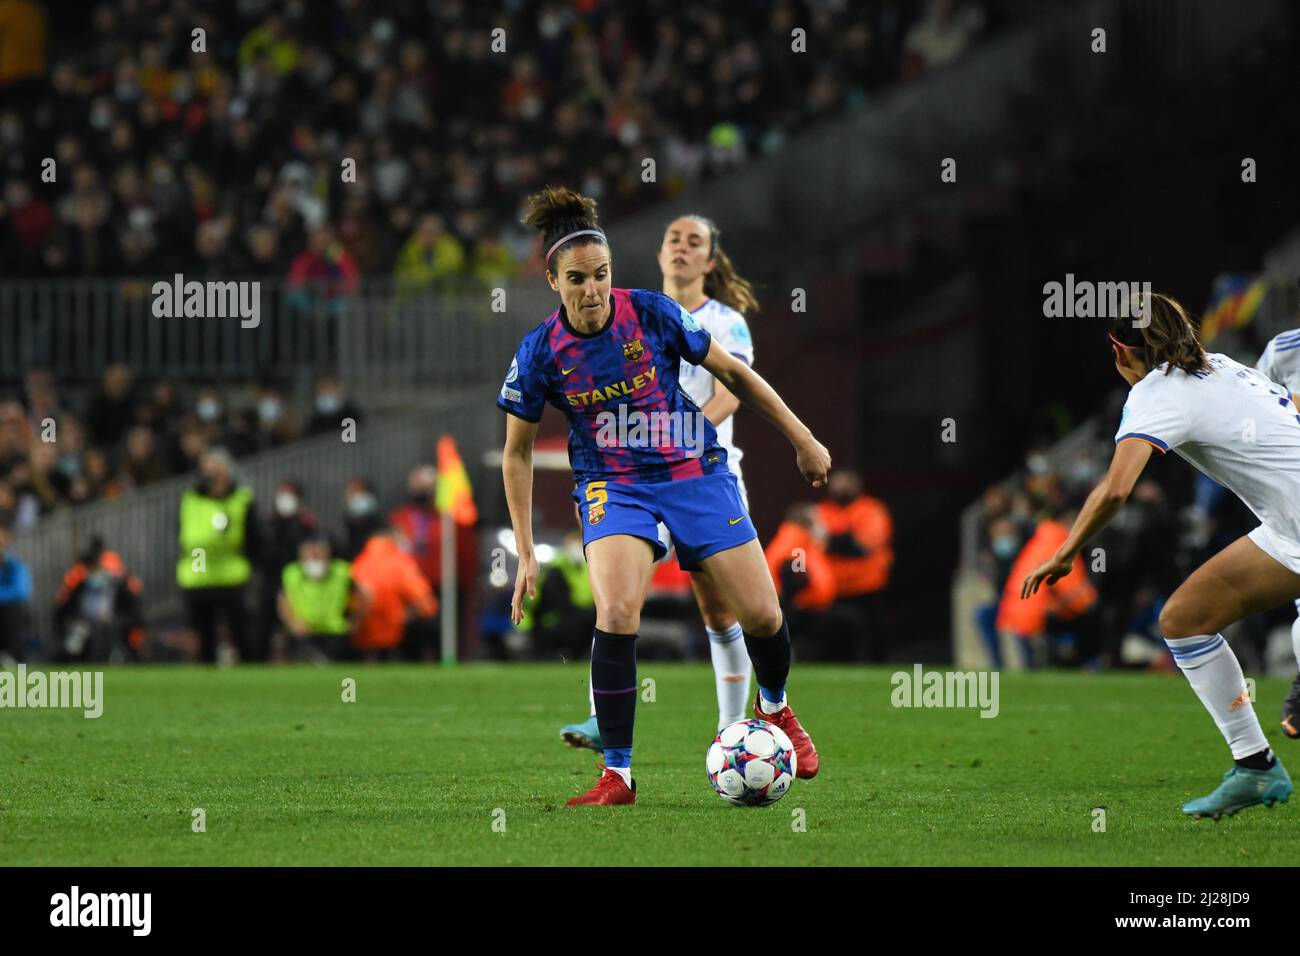 Barcelona, Spain. 30th Mar, 2022. BARCELONA, SPAIN - MARCH 30: Melanie Serrano of Barcelona drives the ball during a UEFA Women's Champions League match between Barcelona v Real Madrid at Camp Nou on March 30, 2022 in Barcelona, Spain. (Photo by Sara Aribó/PxImages) Credit: Px Images/Alamy Live News Stock Photo